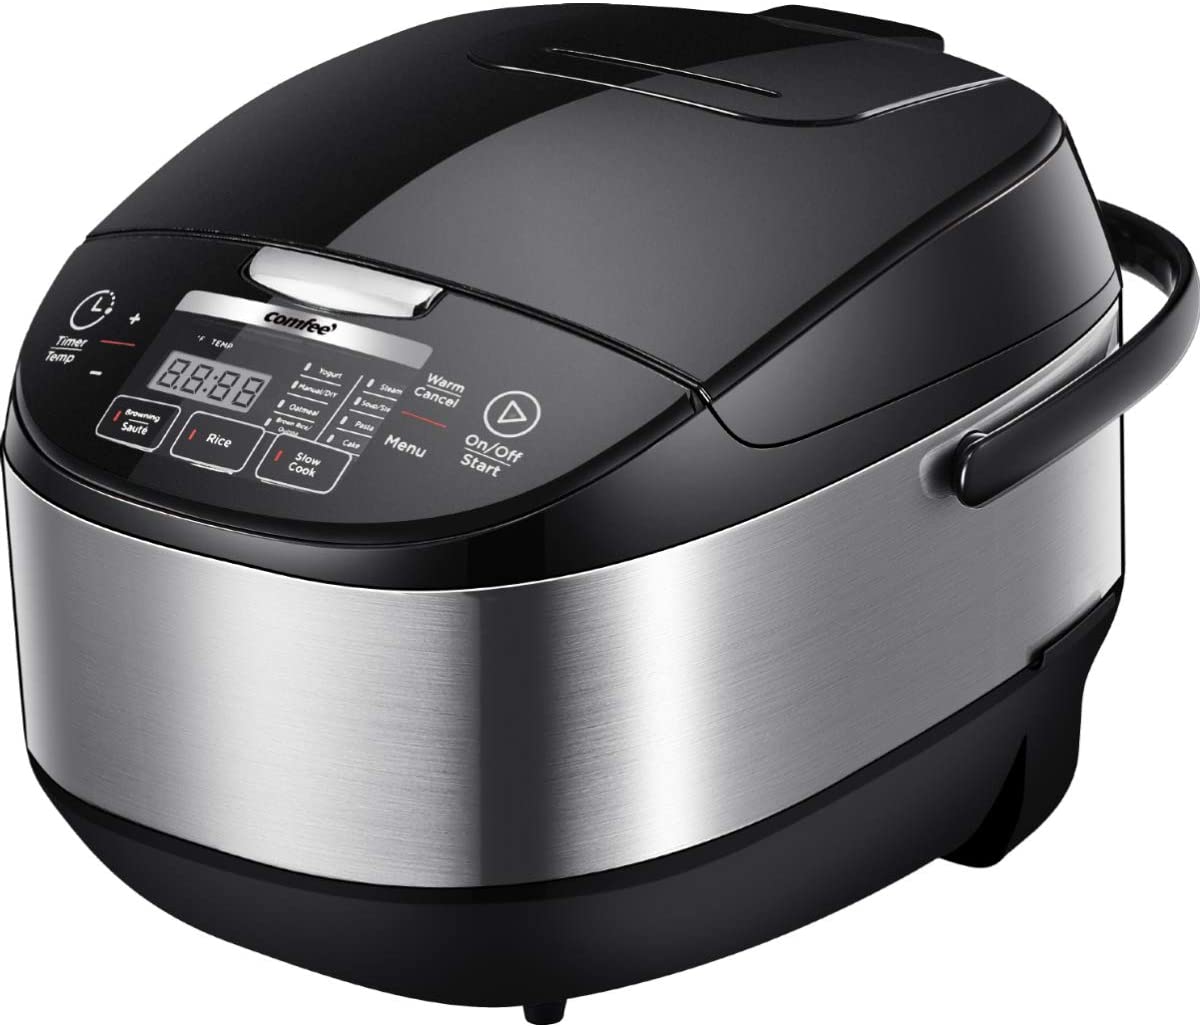 Banu Low Carb Multi-functional LED One-Touch Cooking Rice Cooker Black 1.5 Liter